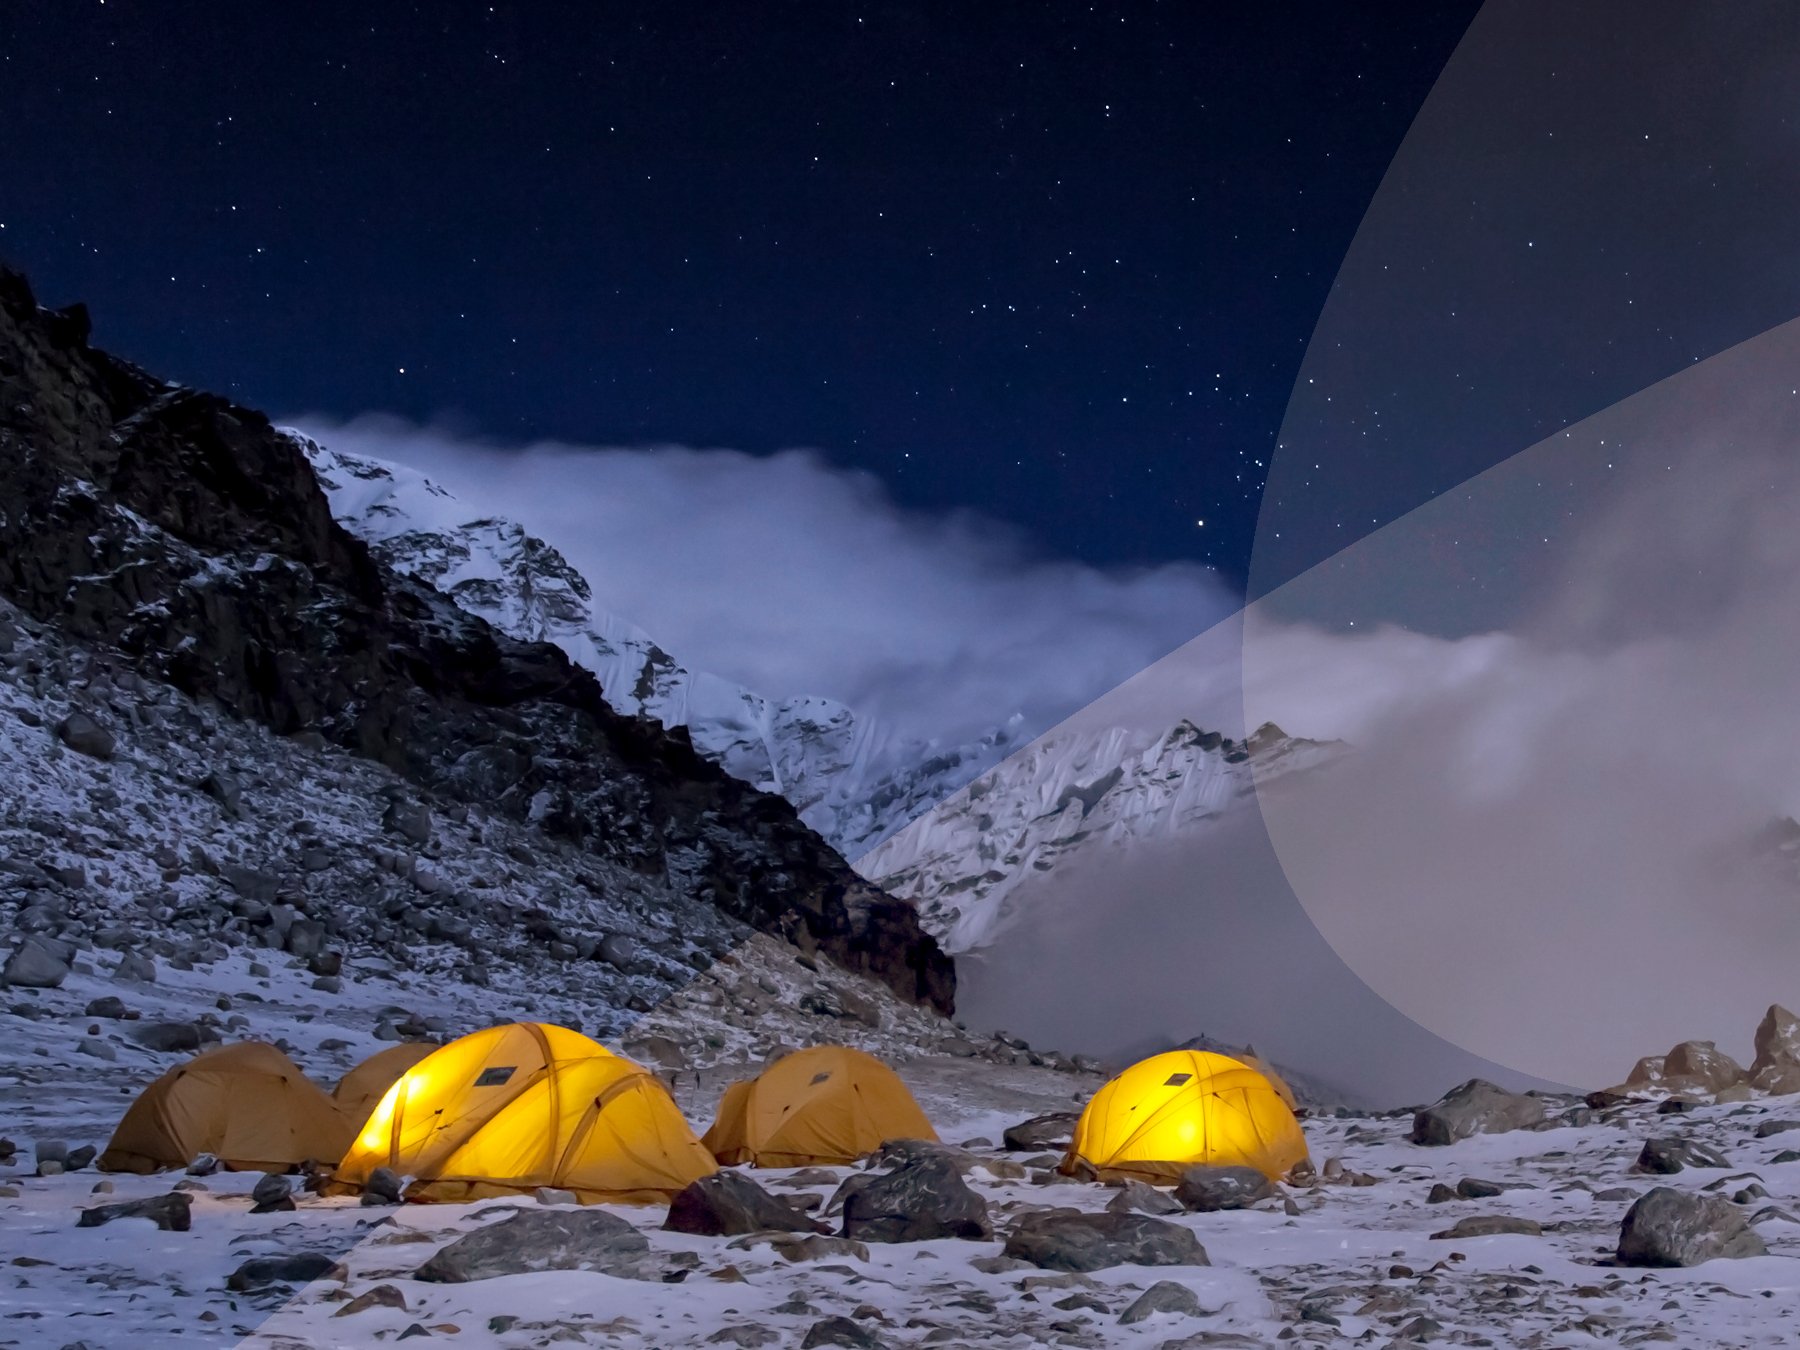 Tents lit up at night at the Mera Peak base camp in Nepal.